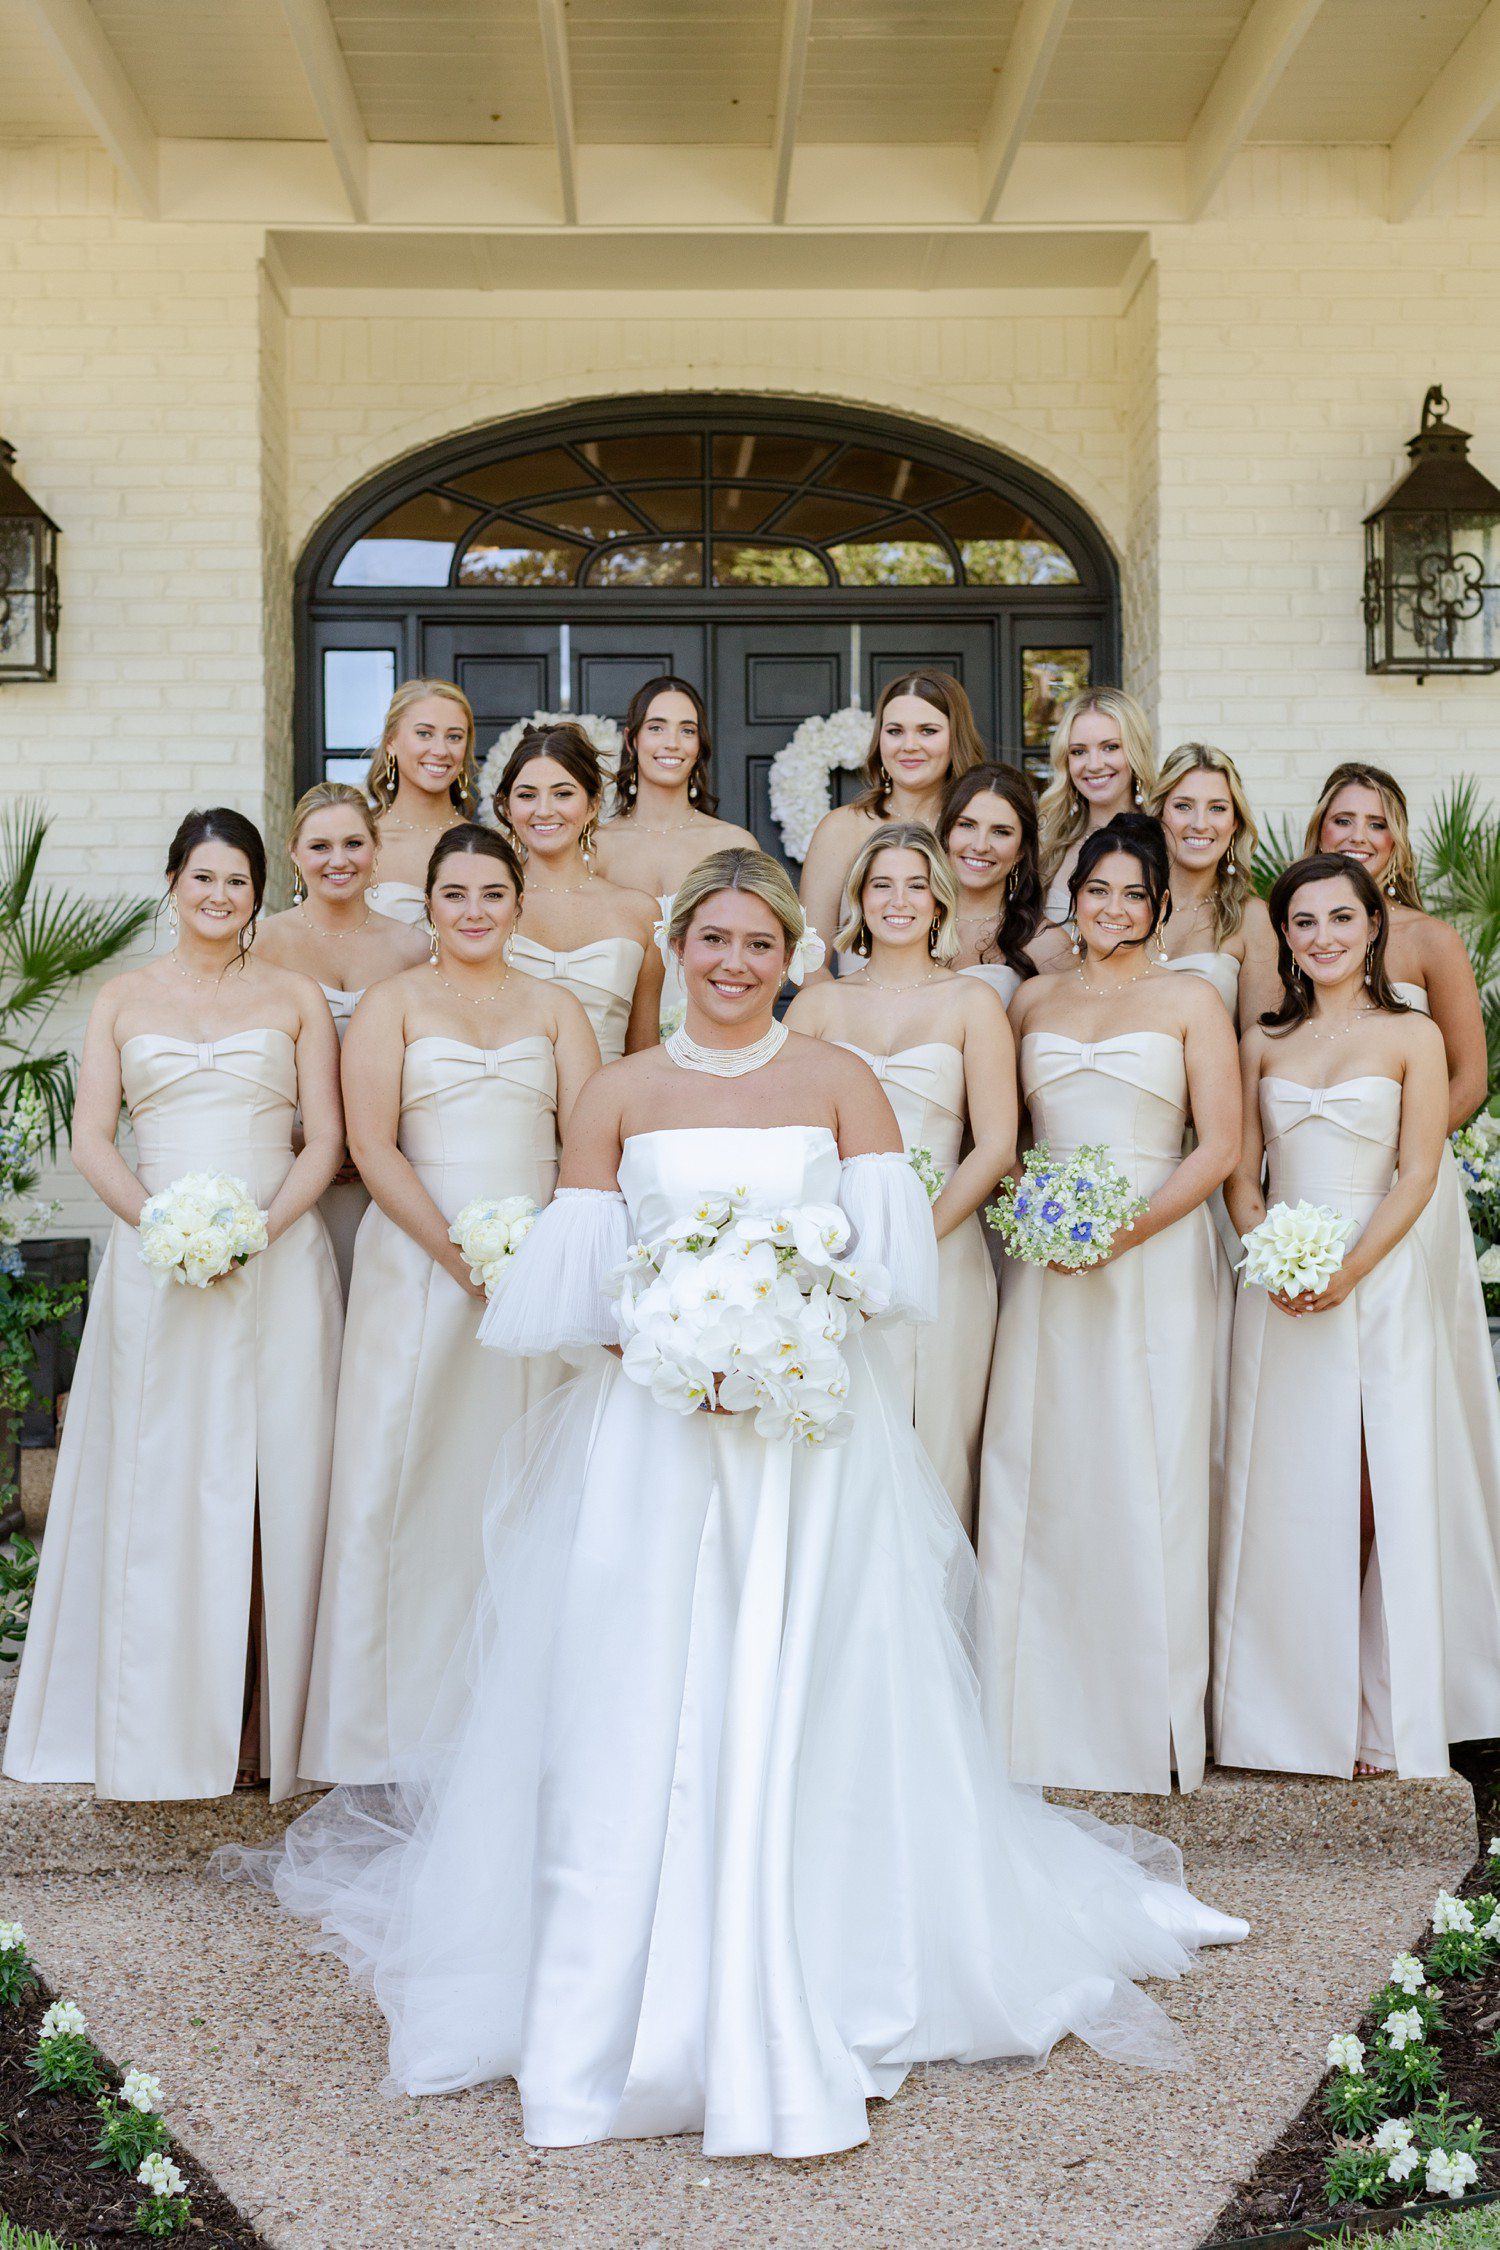 Bride and bridesmaids in champagne dresses.